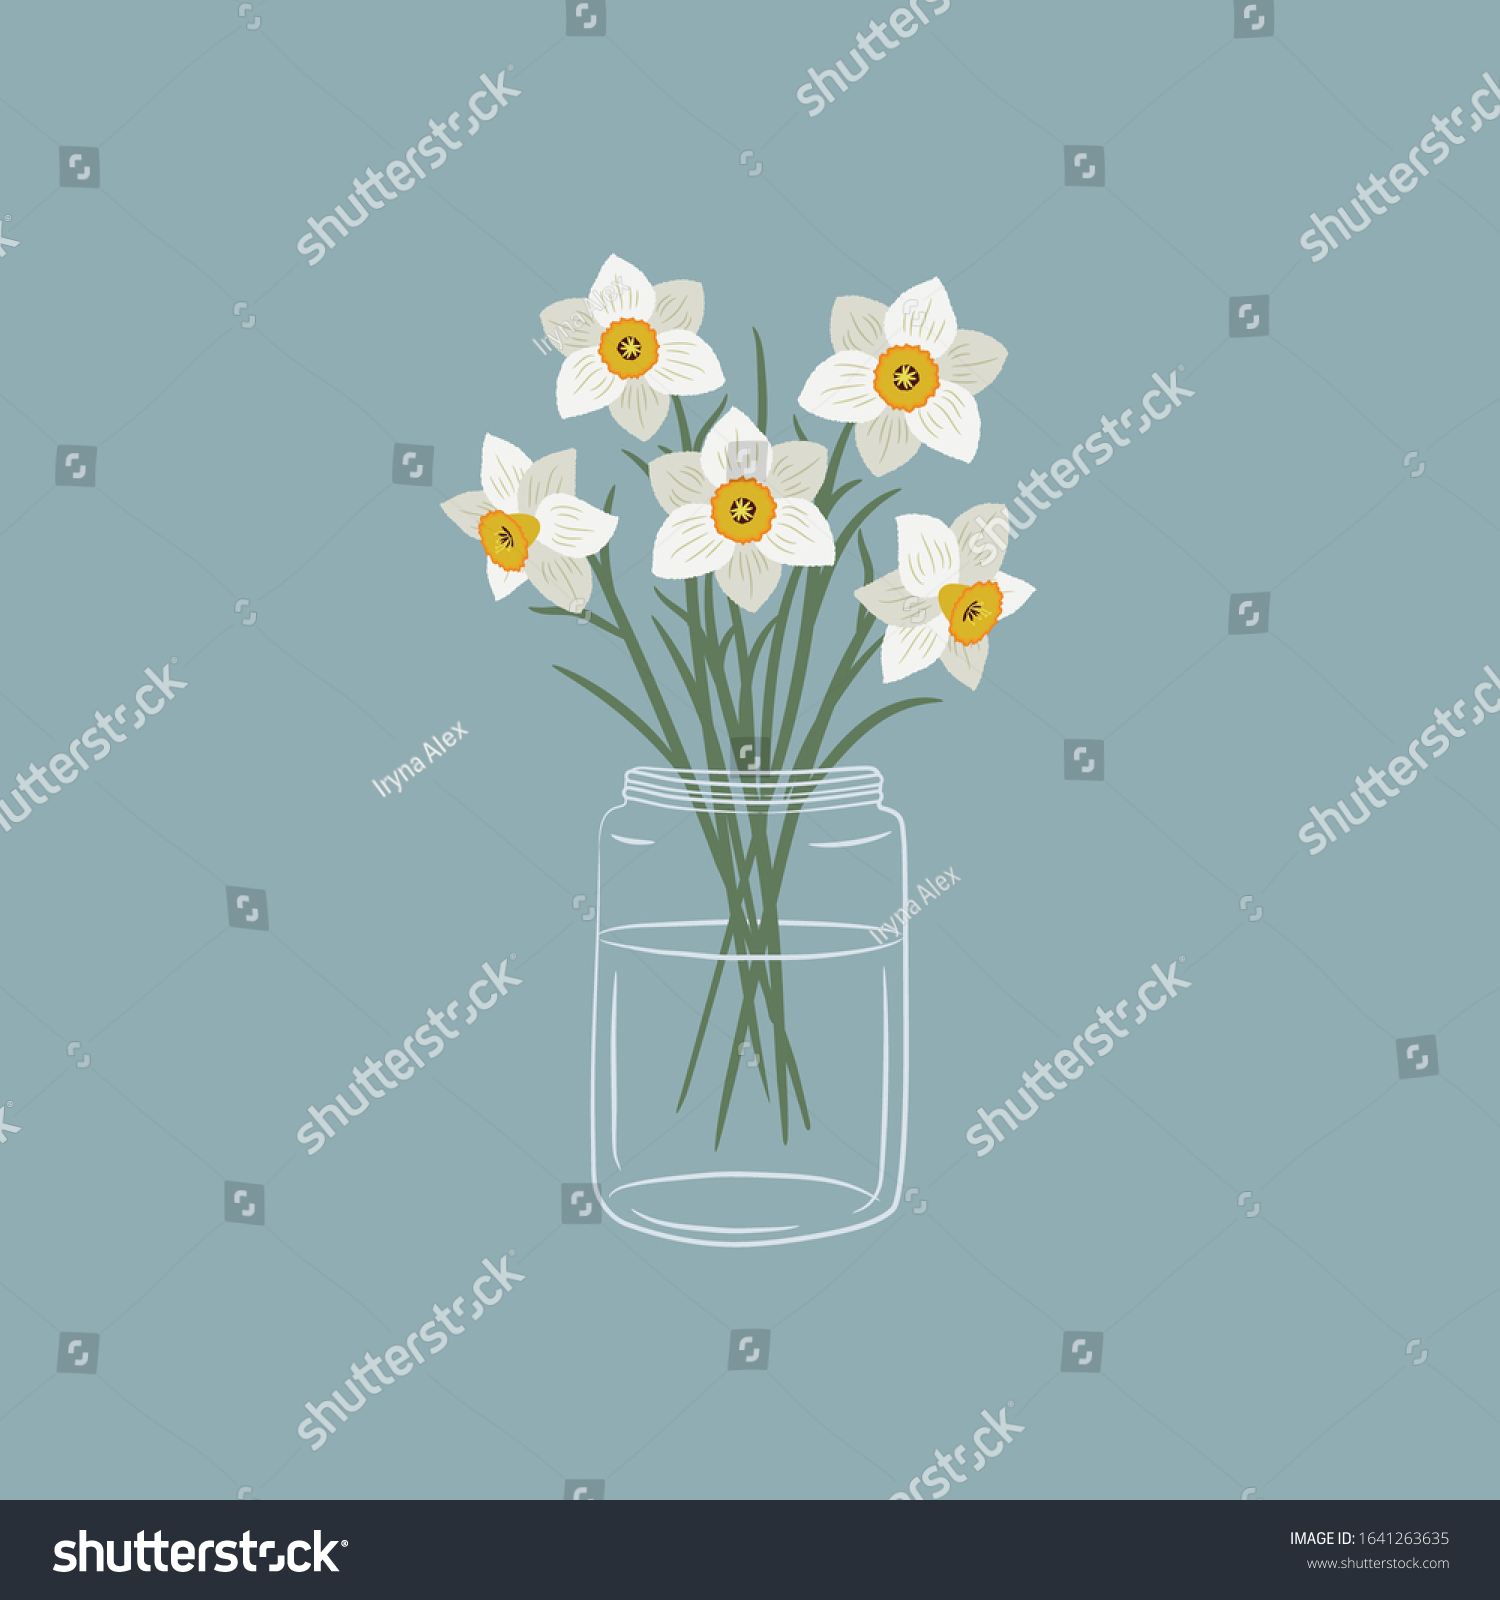 SVG of Daffodils in a glass jar. White daffodils with leaves. Spring flowers. Floral composition. Vector illustration on a blue background svg